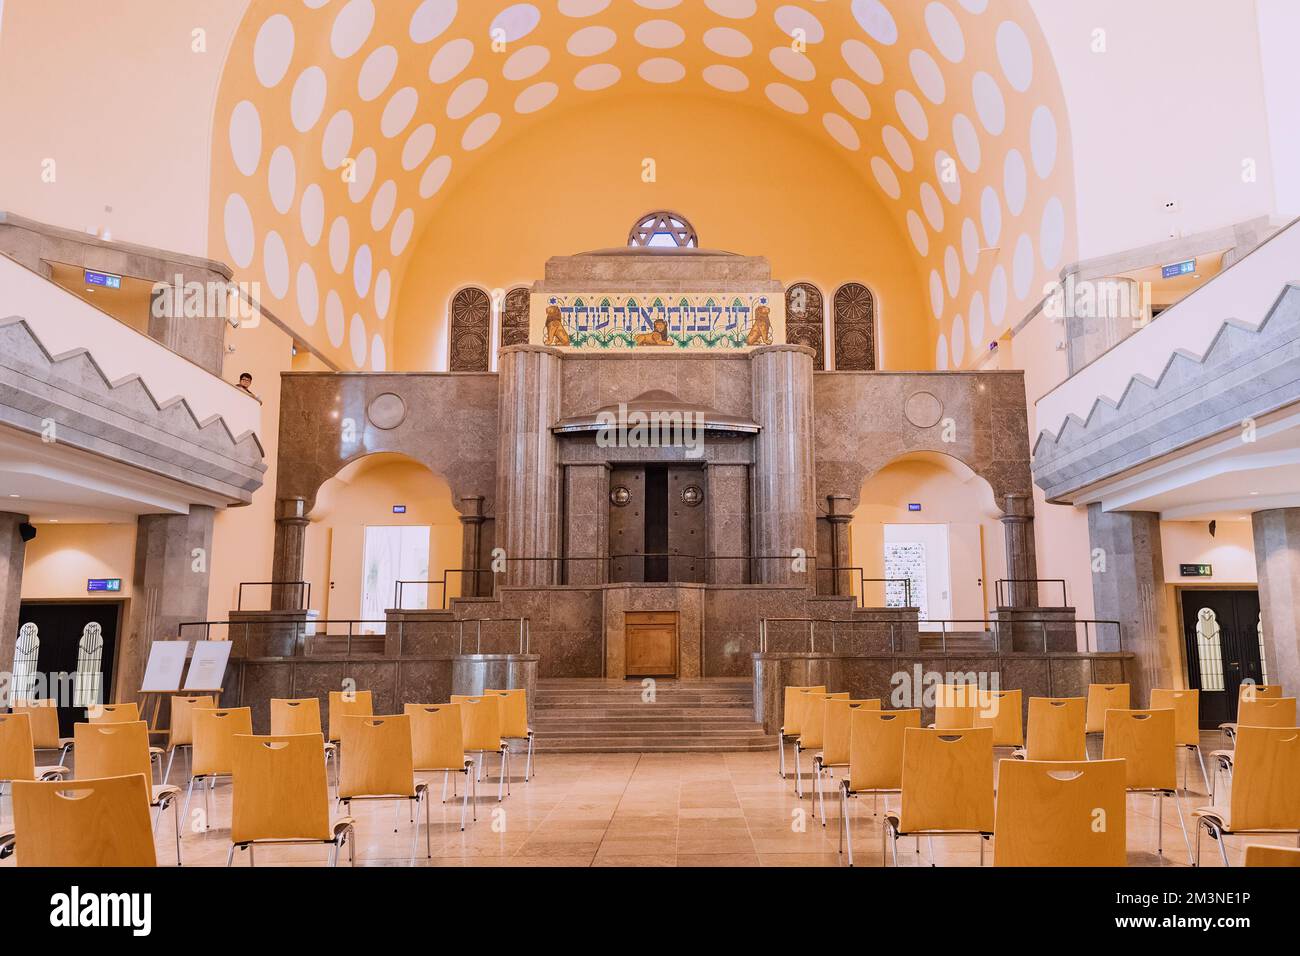 28 July 2022, Essen, Germany: Panoramic view of bright and decorated interior of the Jewish synagogue in Essen. Stock Photo